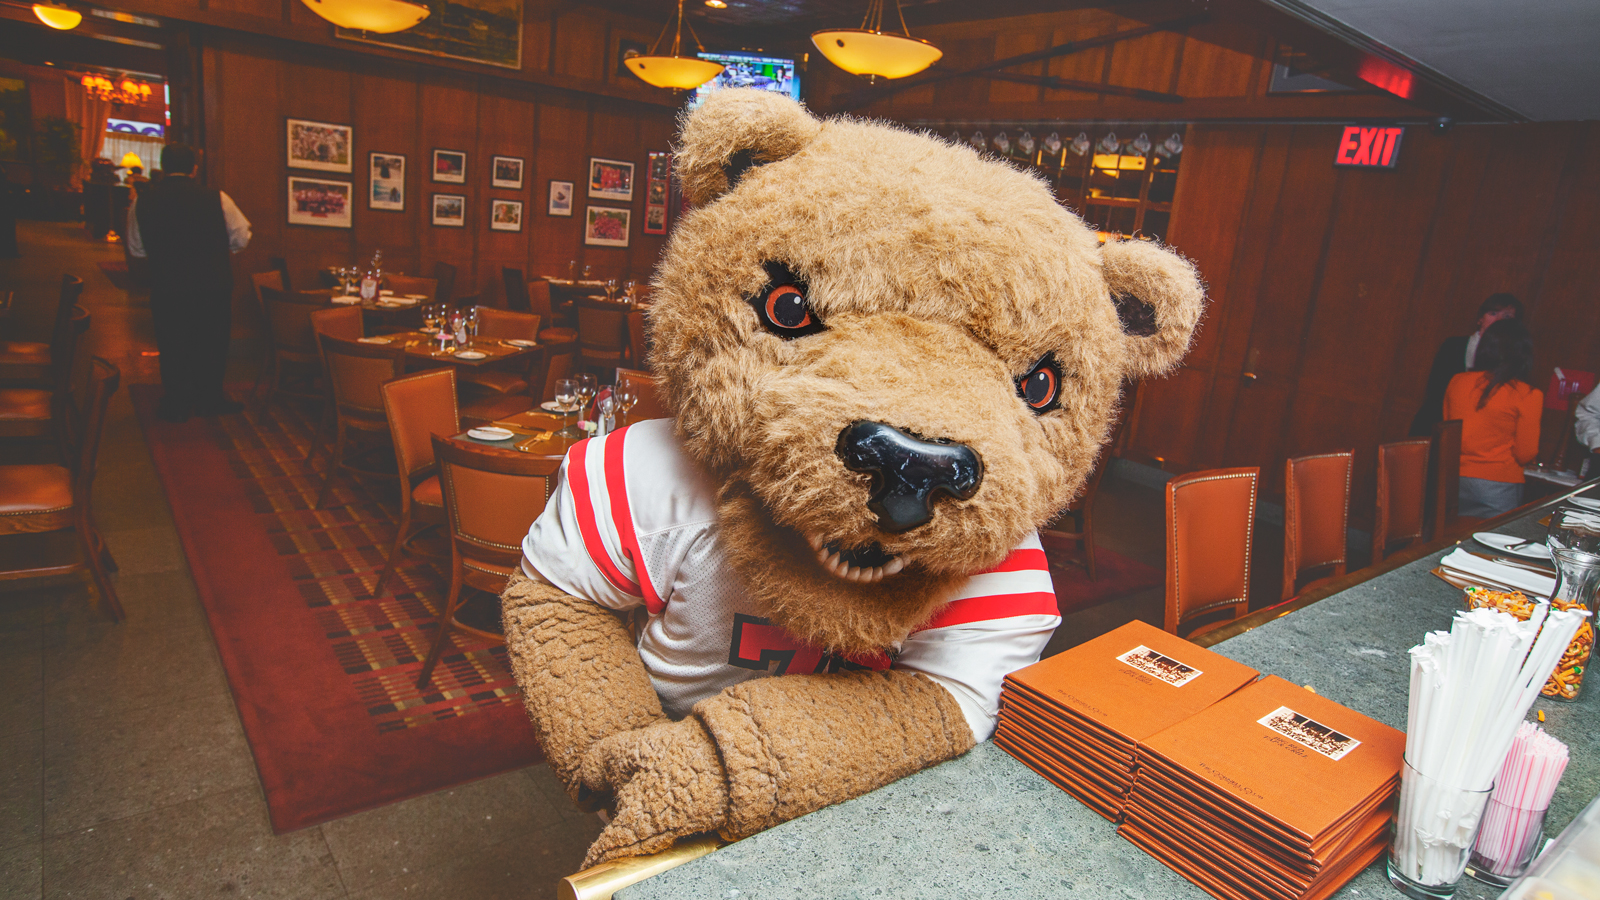 Touchdown bellies up to the bar at the Big Red Tap & Grill on the Cornell Club’s main floor